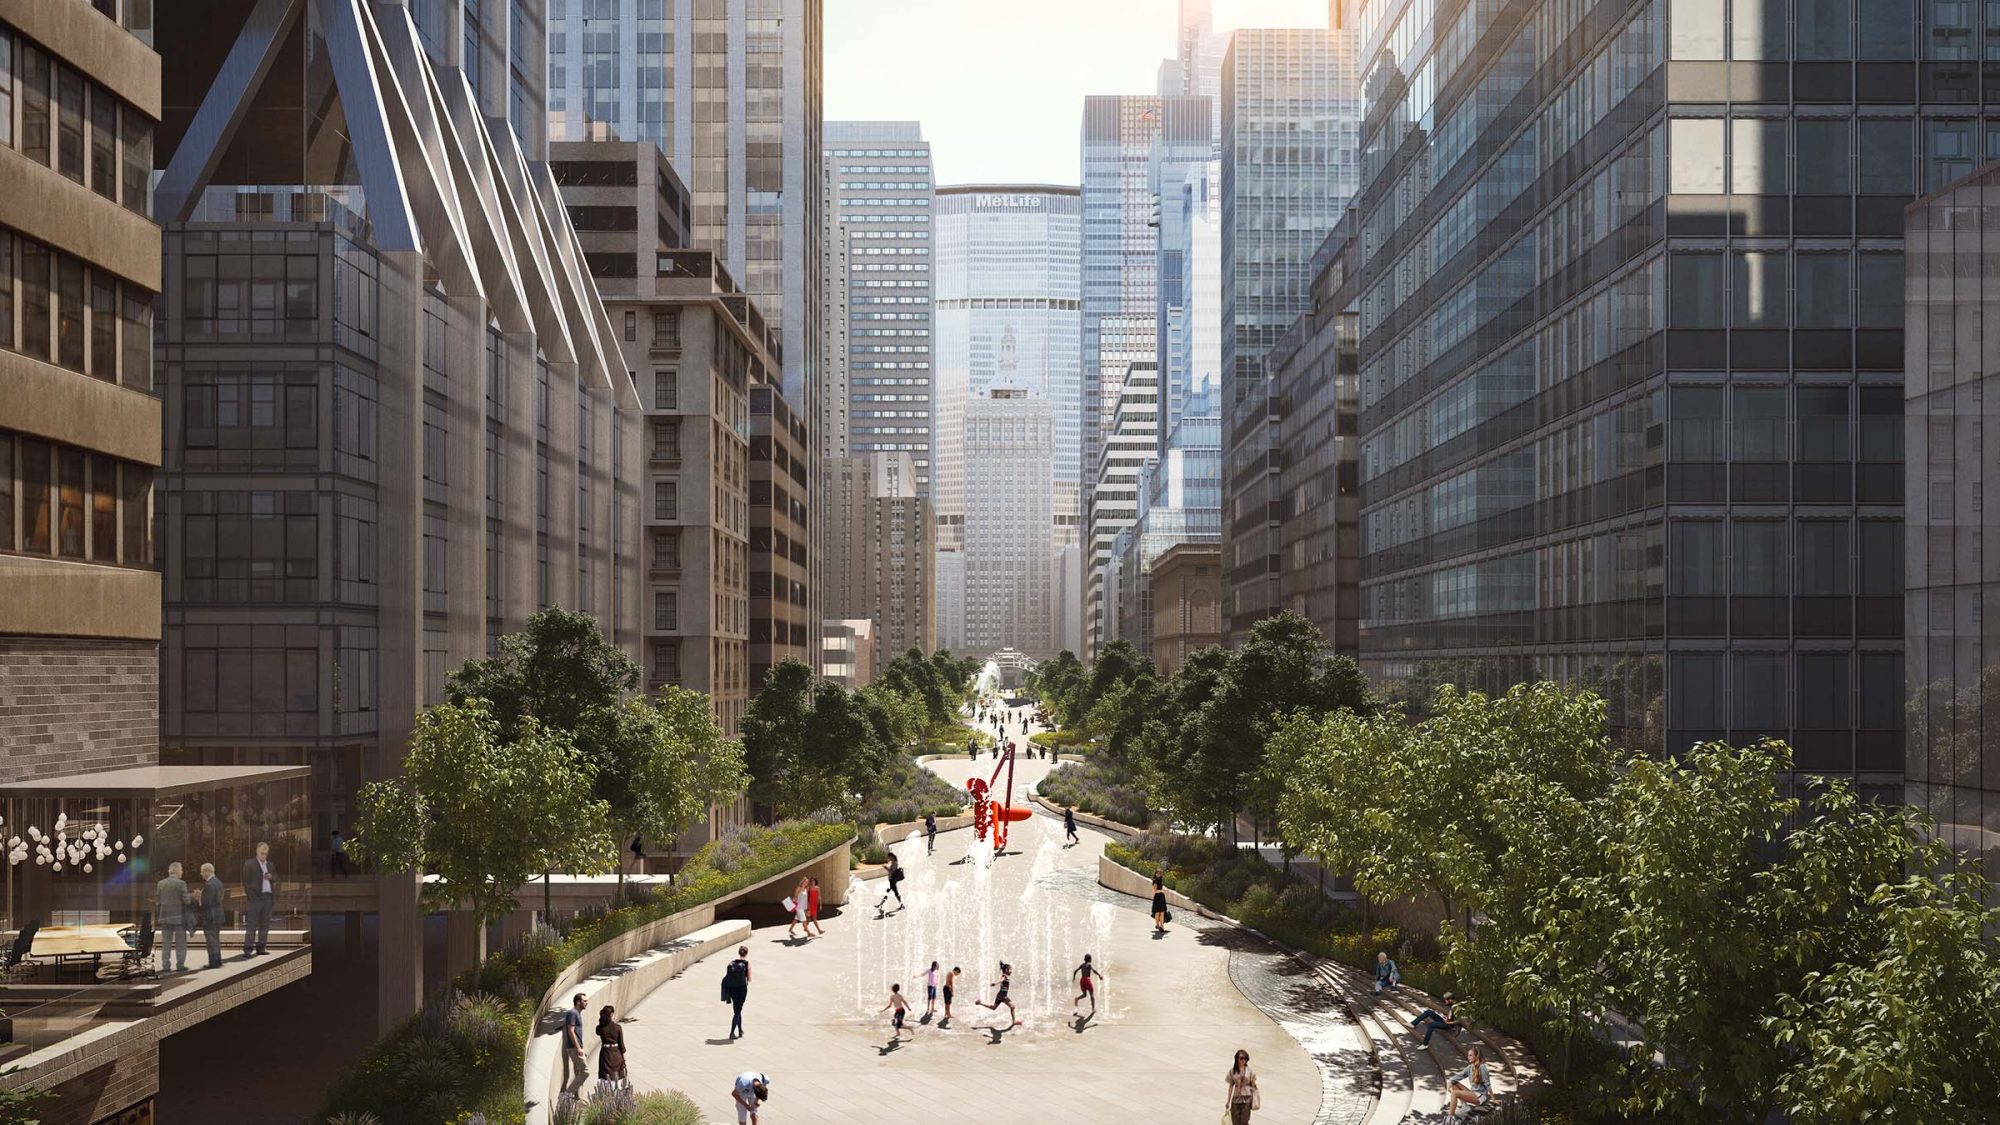 M Moser concept render featuring an elevated park concept in Manhattan.